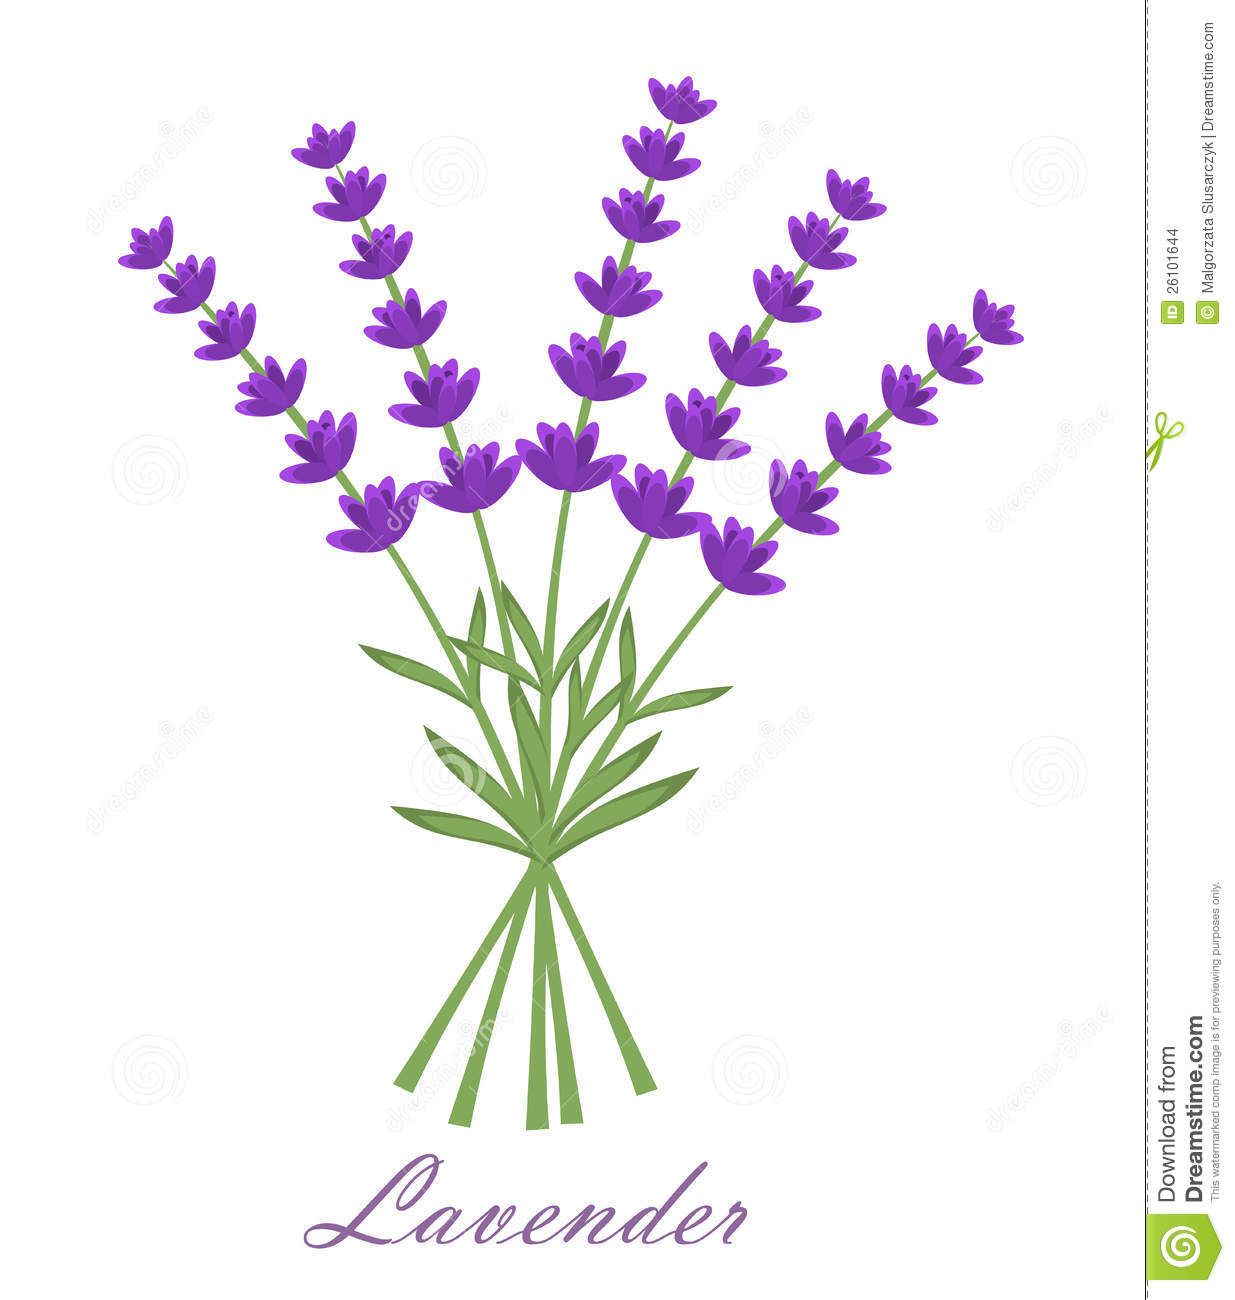 Free clipart lavender flowers